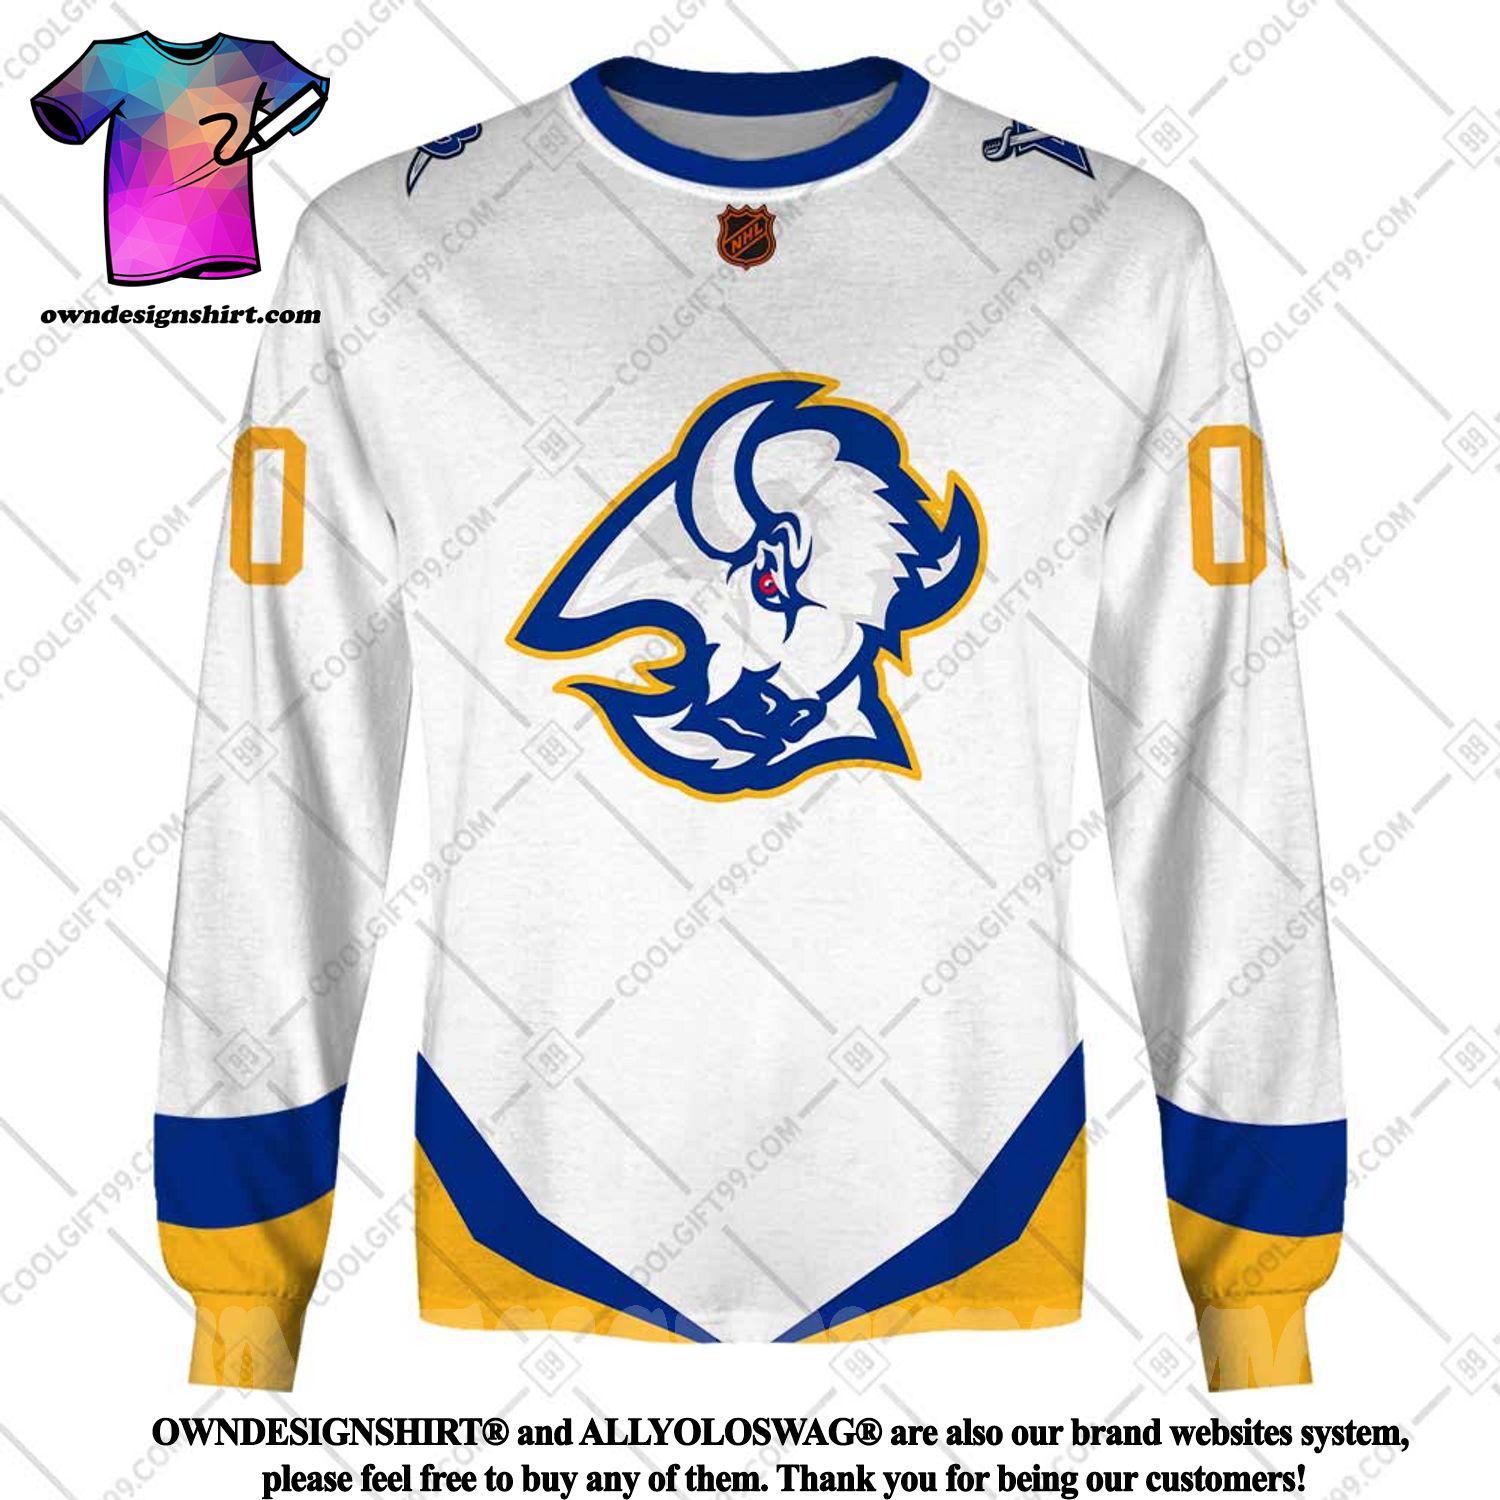 Sabres' Reverse Retro brings 'goat head' to royal blue and gold